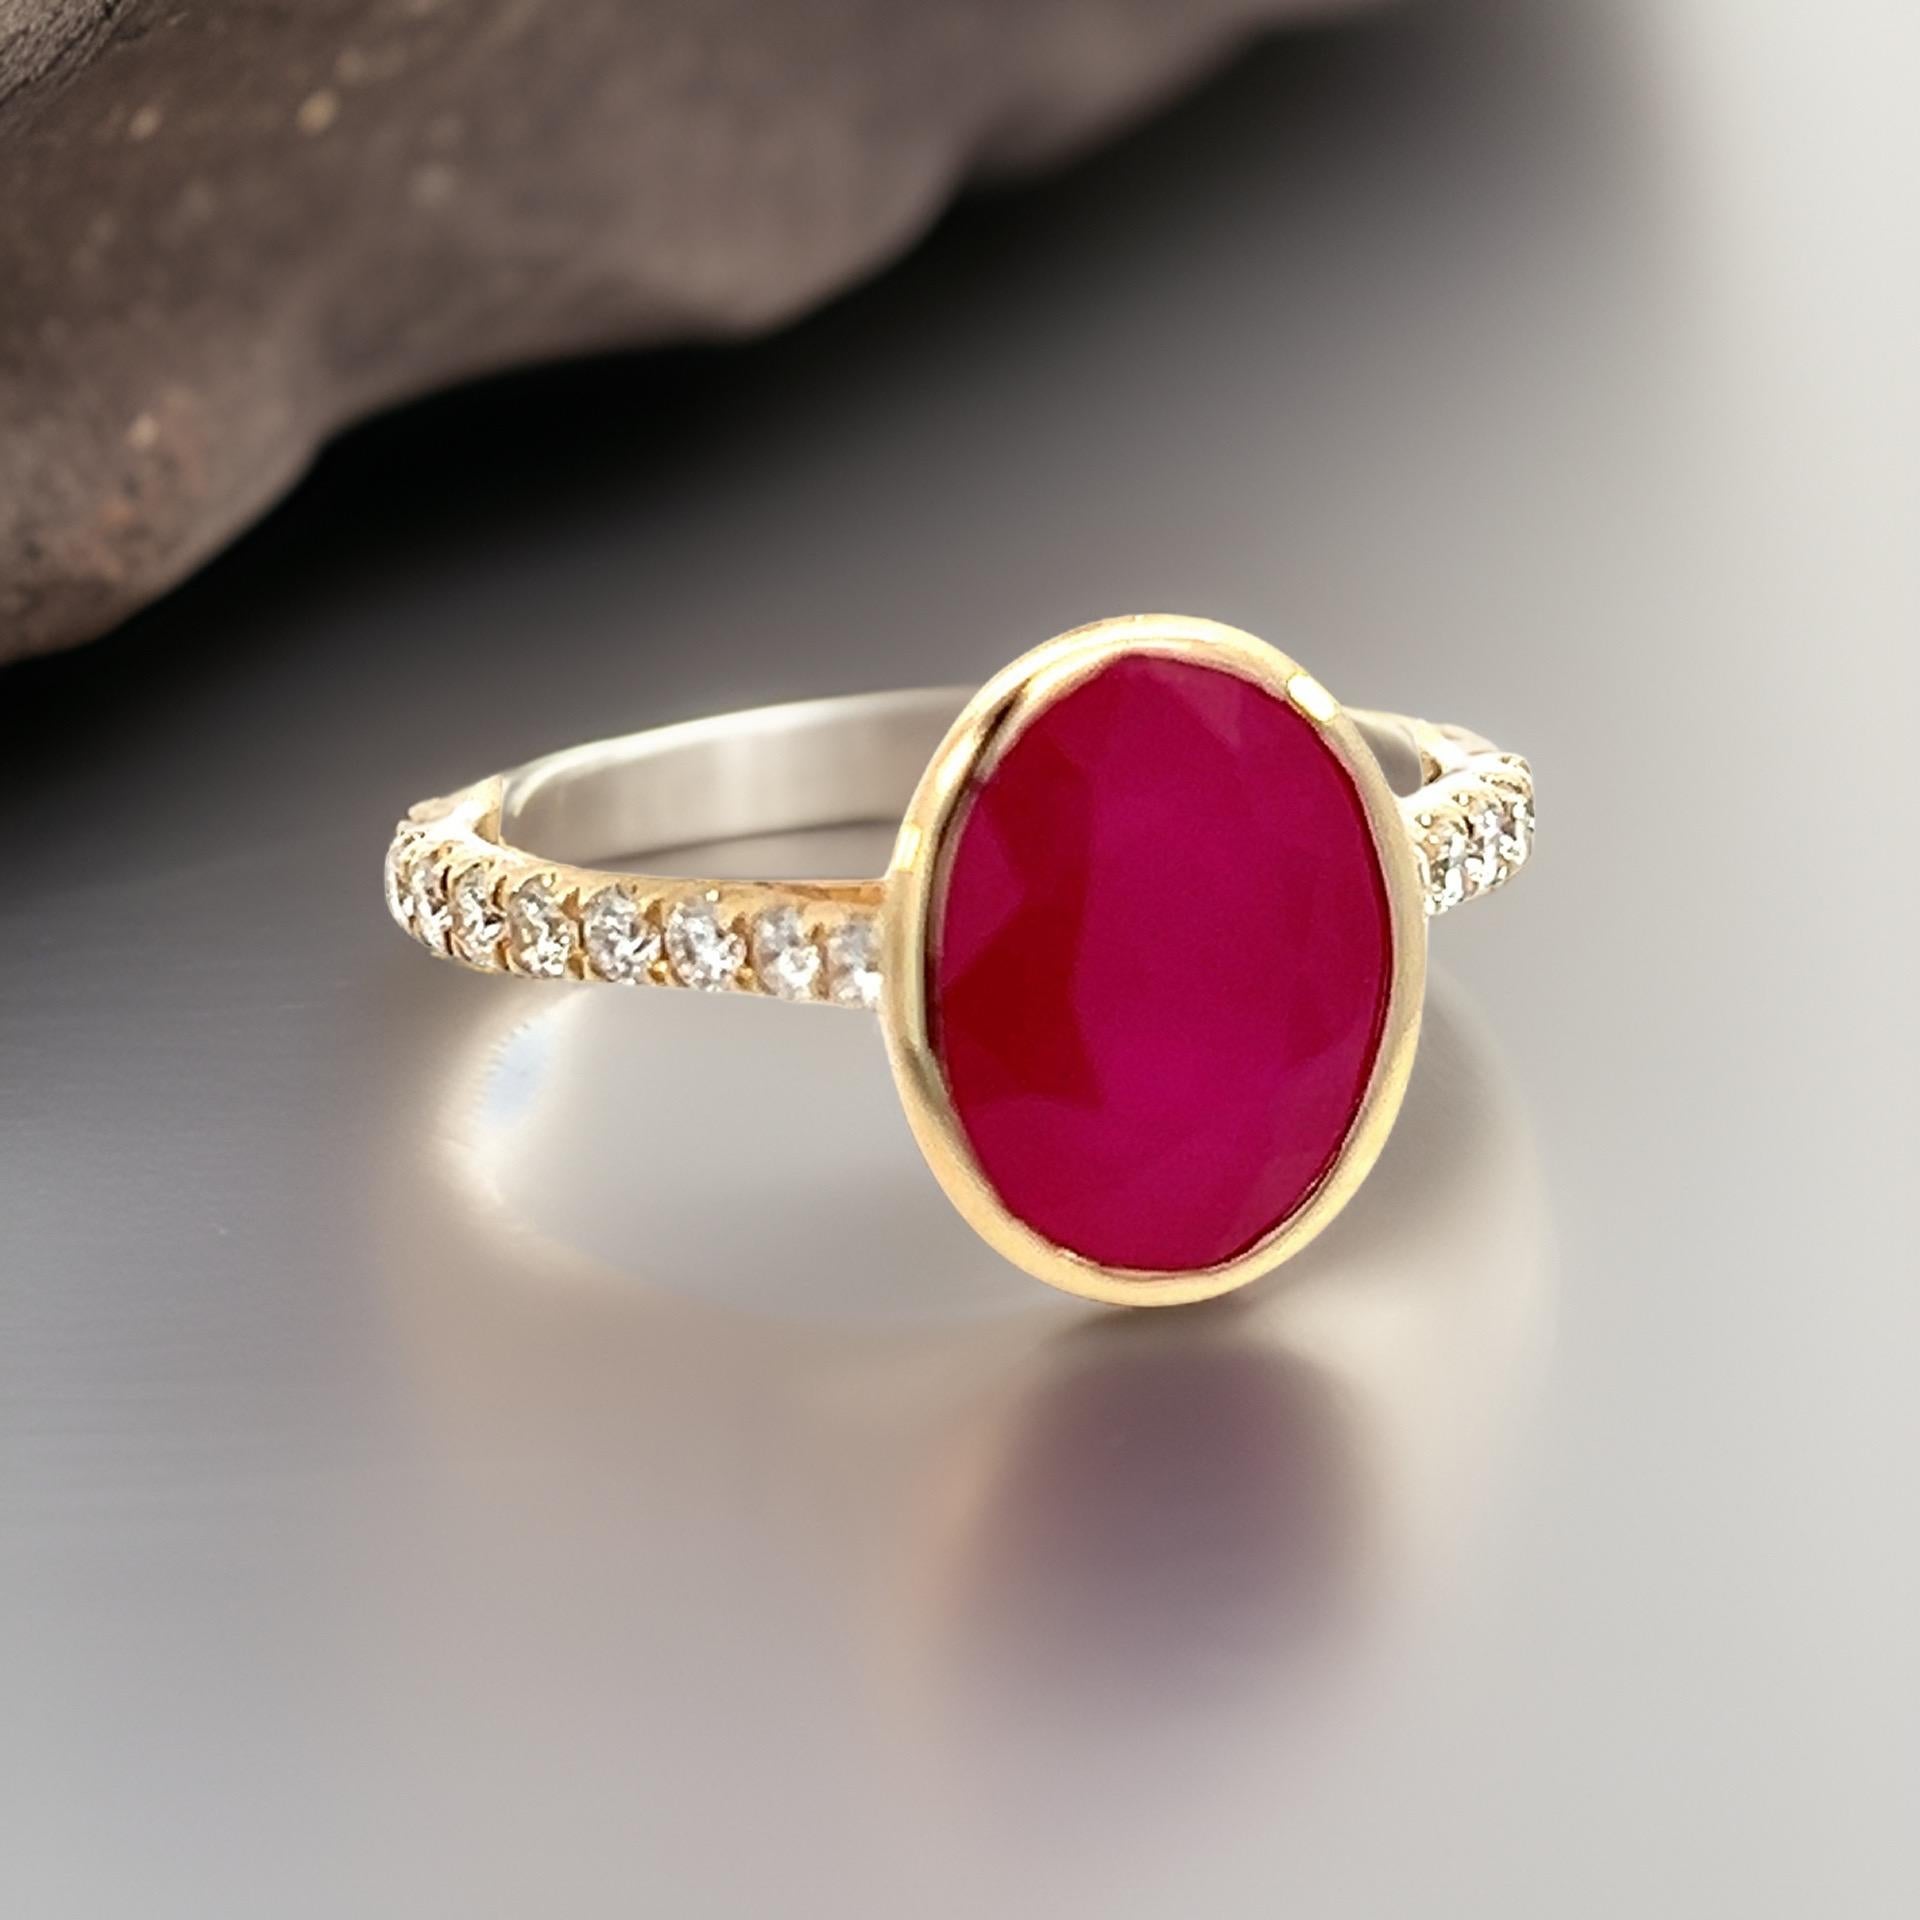 Natural Ruby Diamond Ring 6.75 14k Y Gold 4.38 TCW Certified For Sale 1